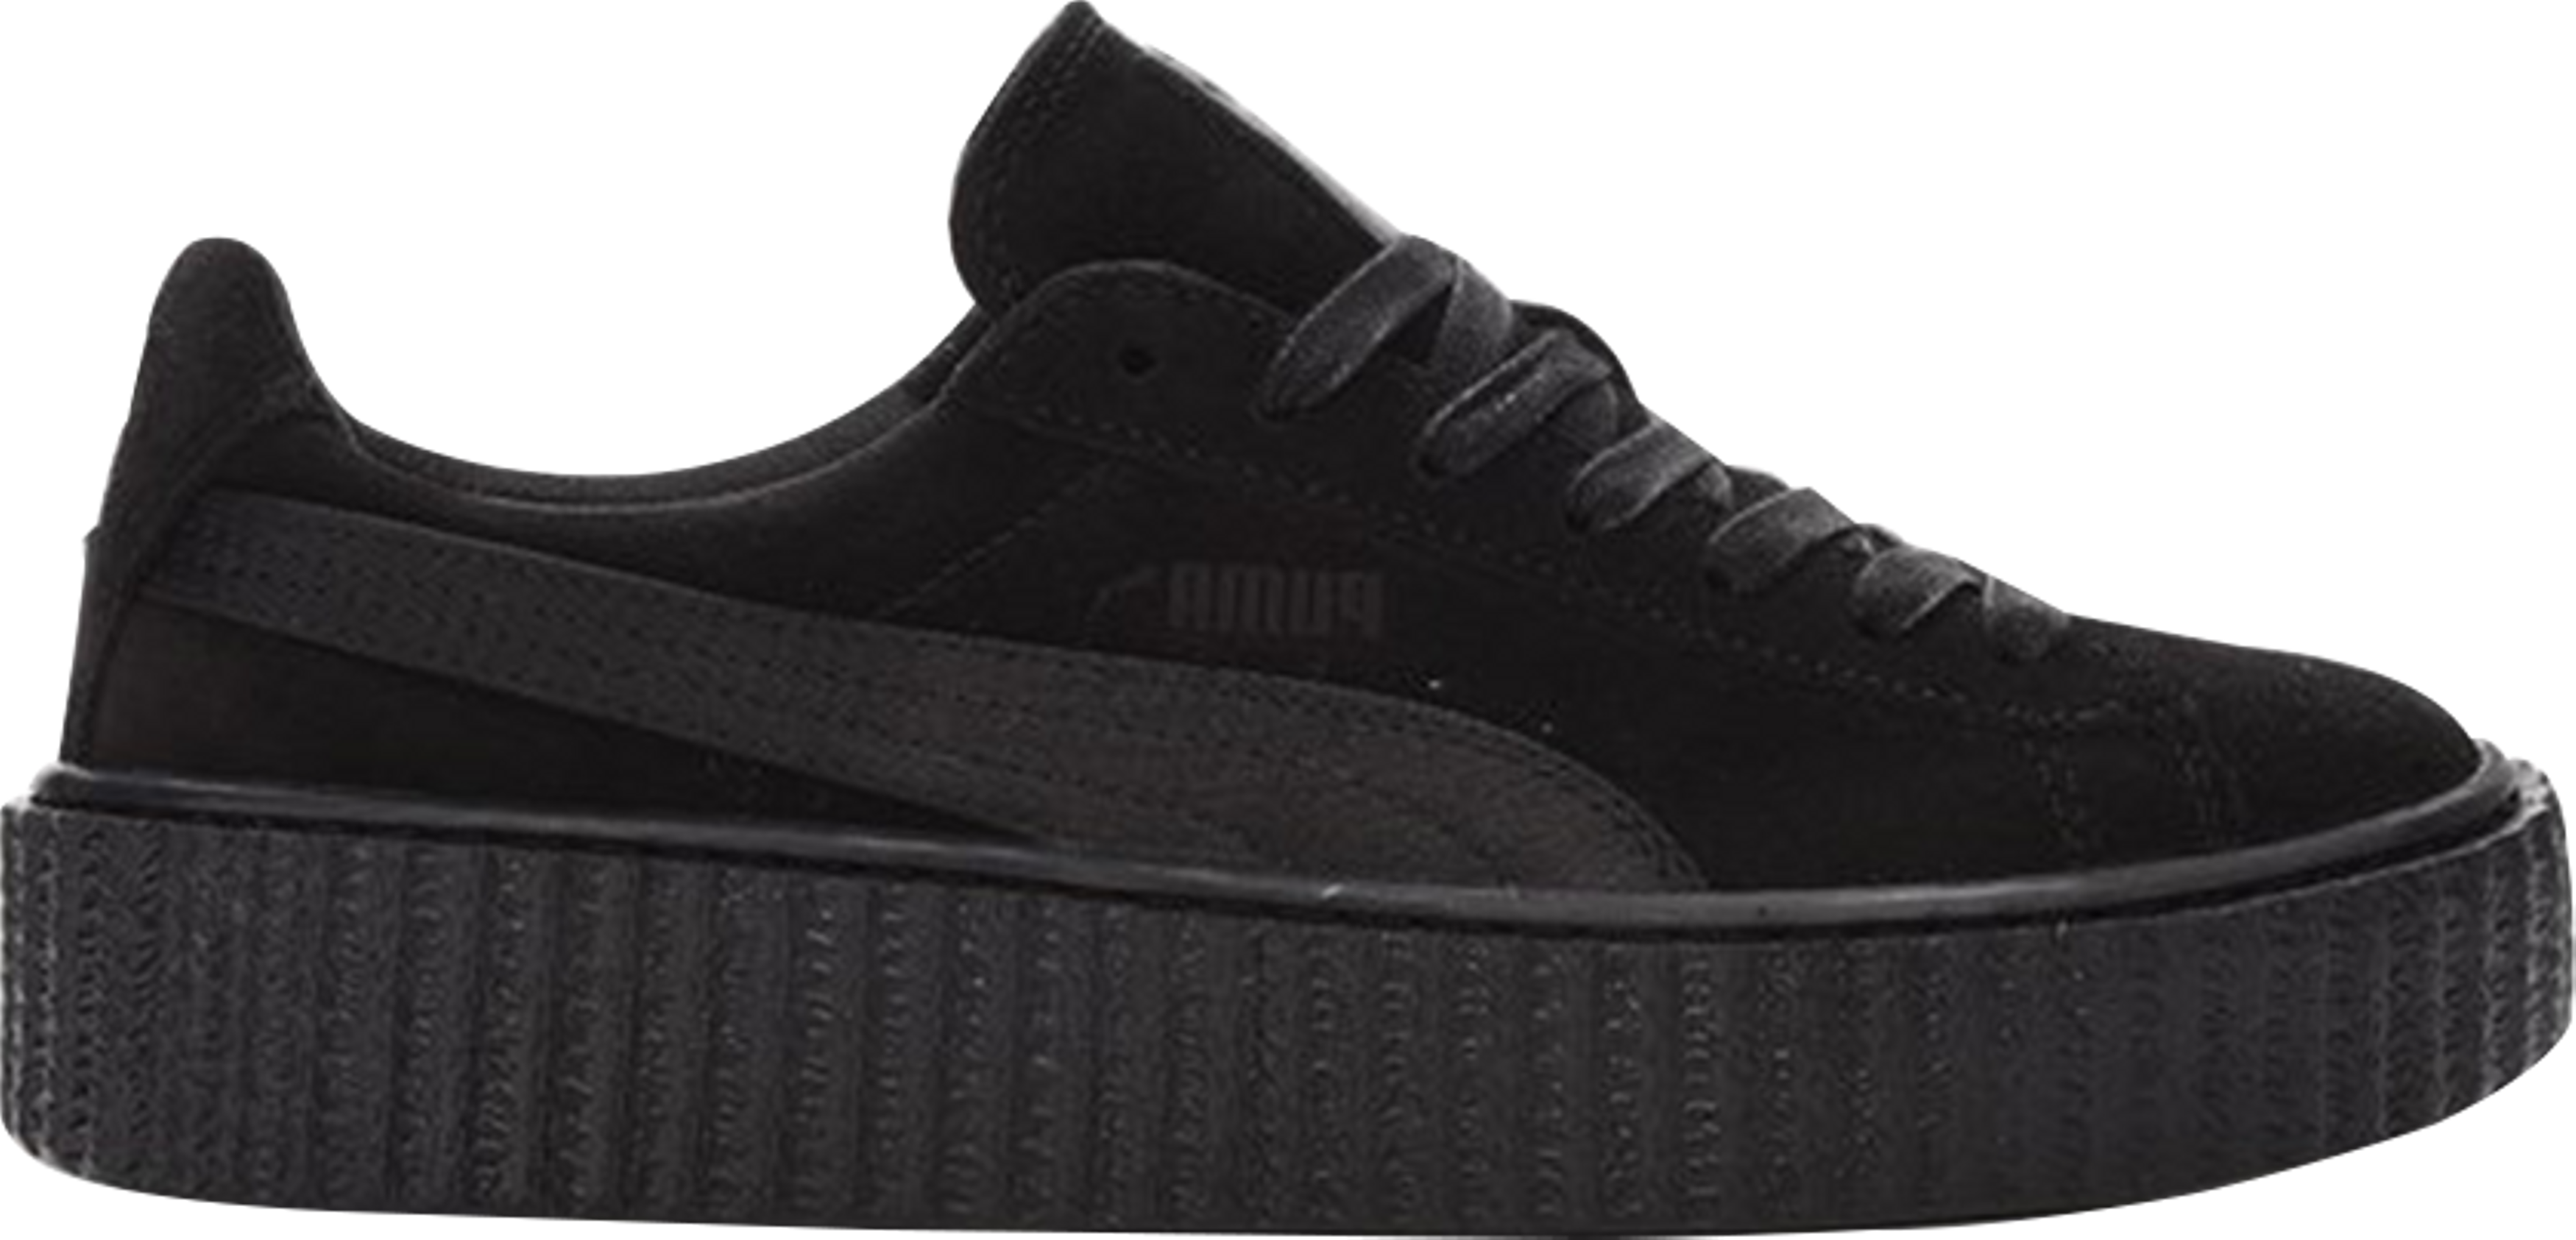 Buy Fenty x Wmns Suede Creepers 'Black' - 362268 01 | GOAT